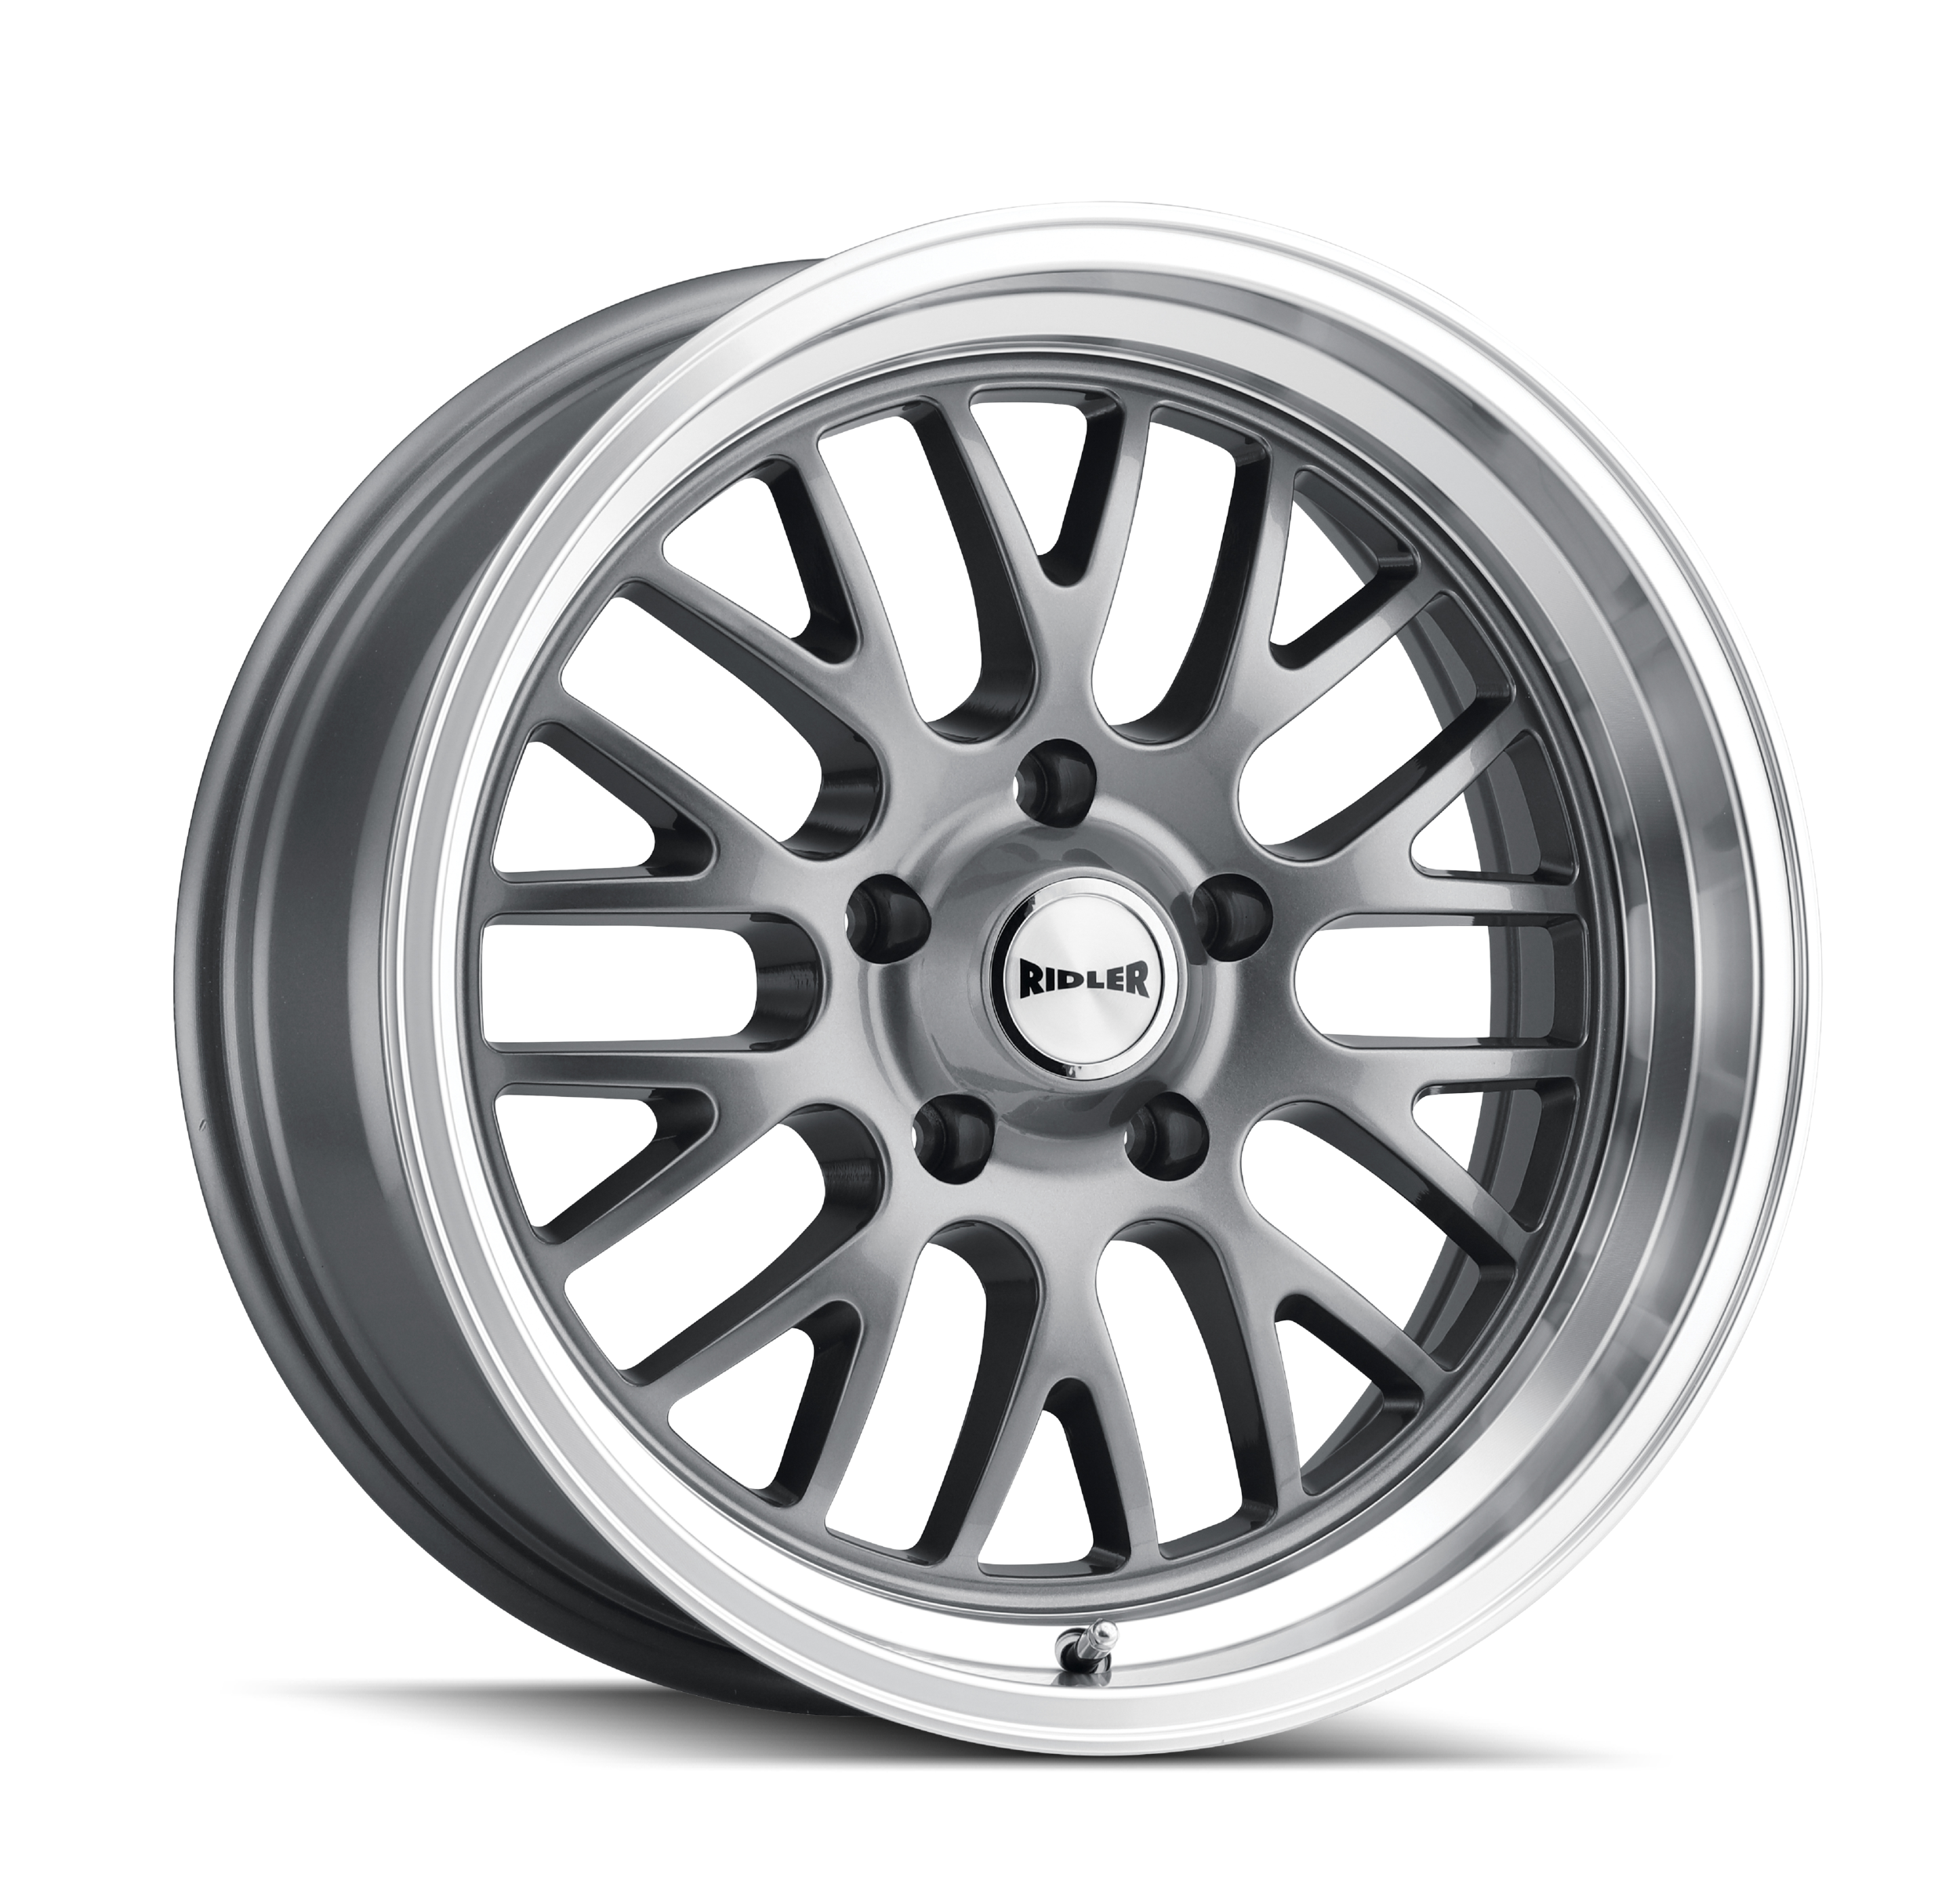 RIDLER 650 Wheel with Chrome 17 x 7. inches /5 x 83 mm, 0 mm Offset 